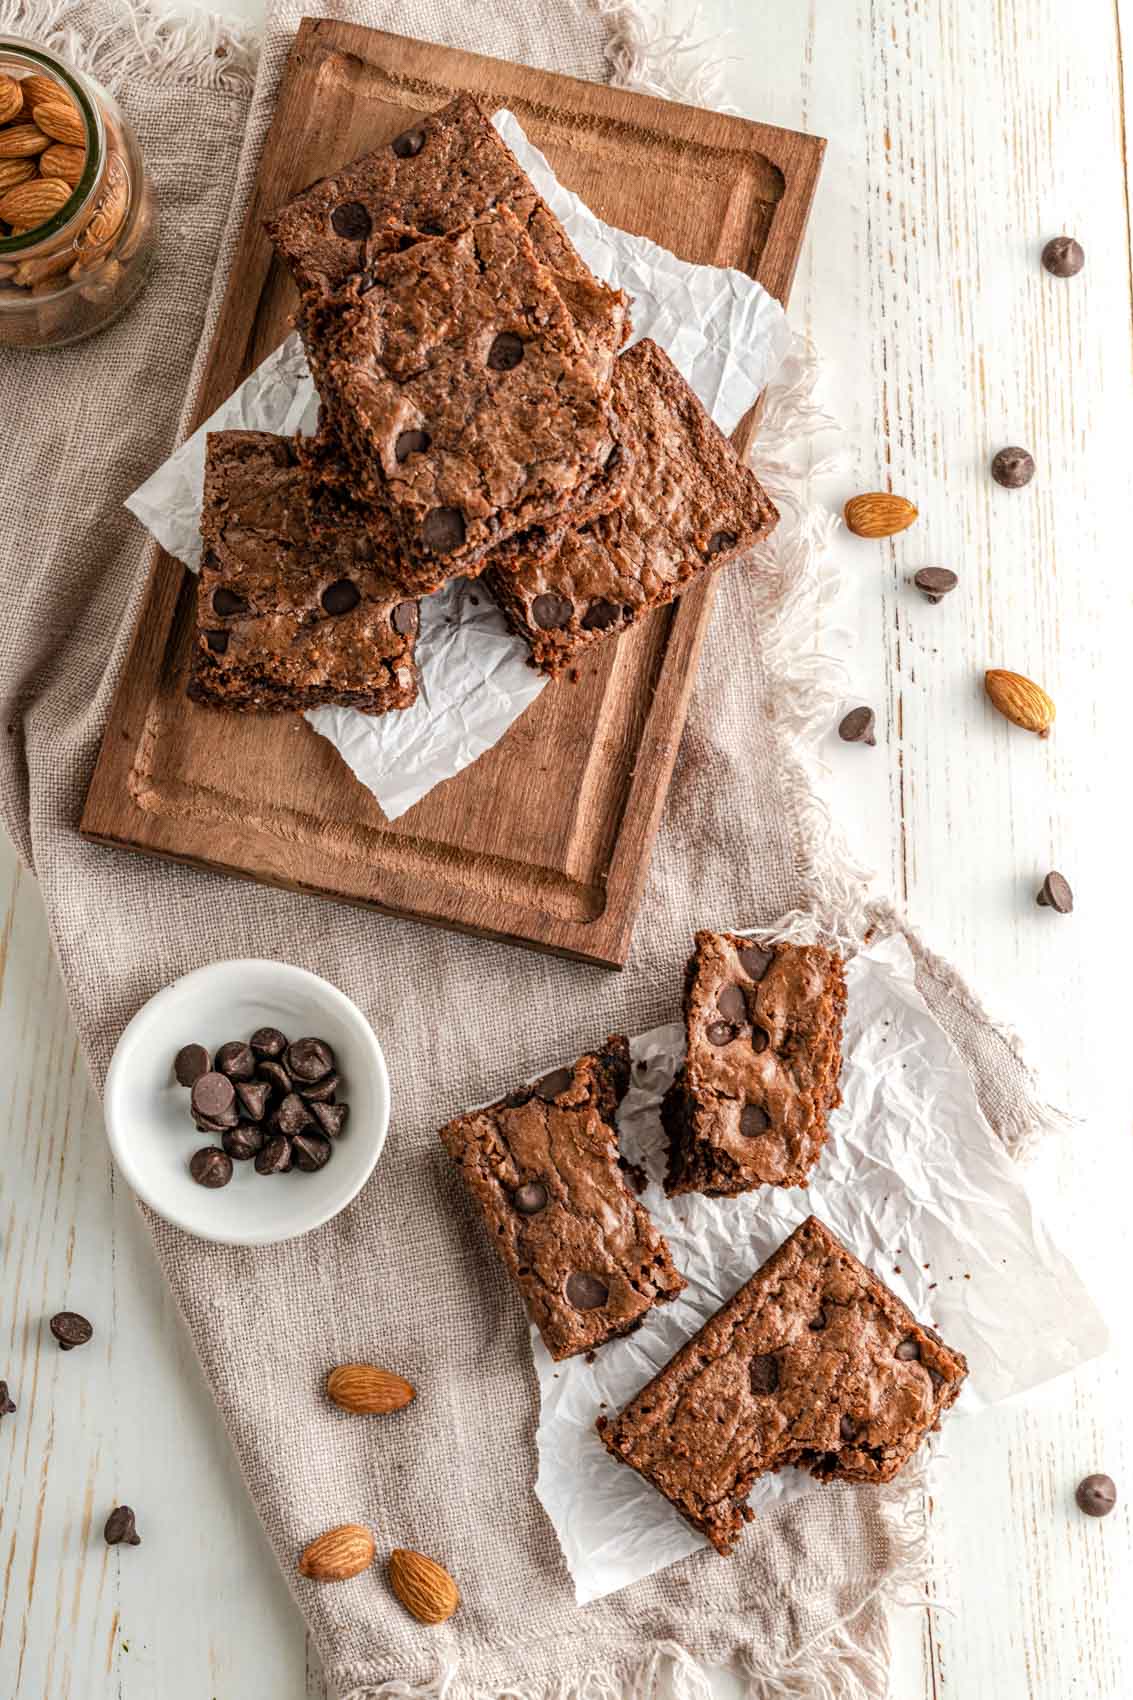 brownies on a cutting board next to almonds and chocolate chips